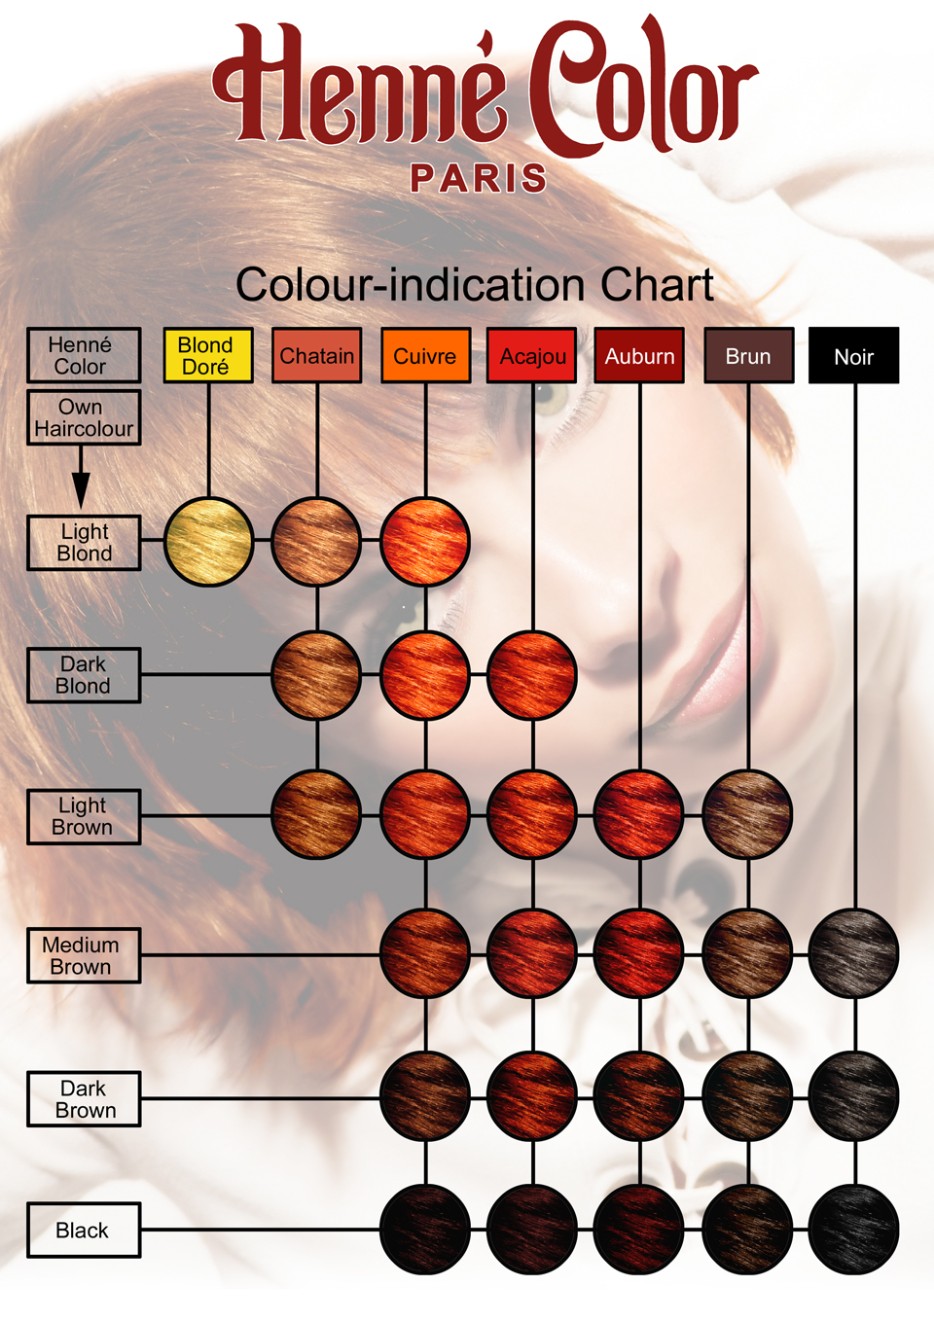 Colour indication Chart to give an indication about the resulting colour